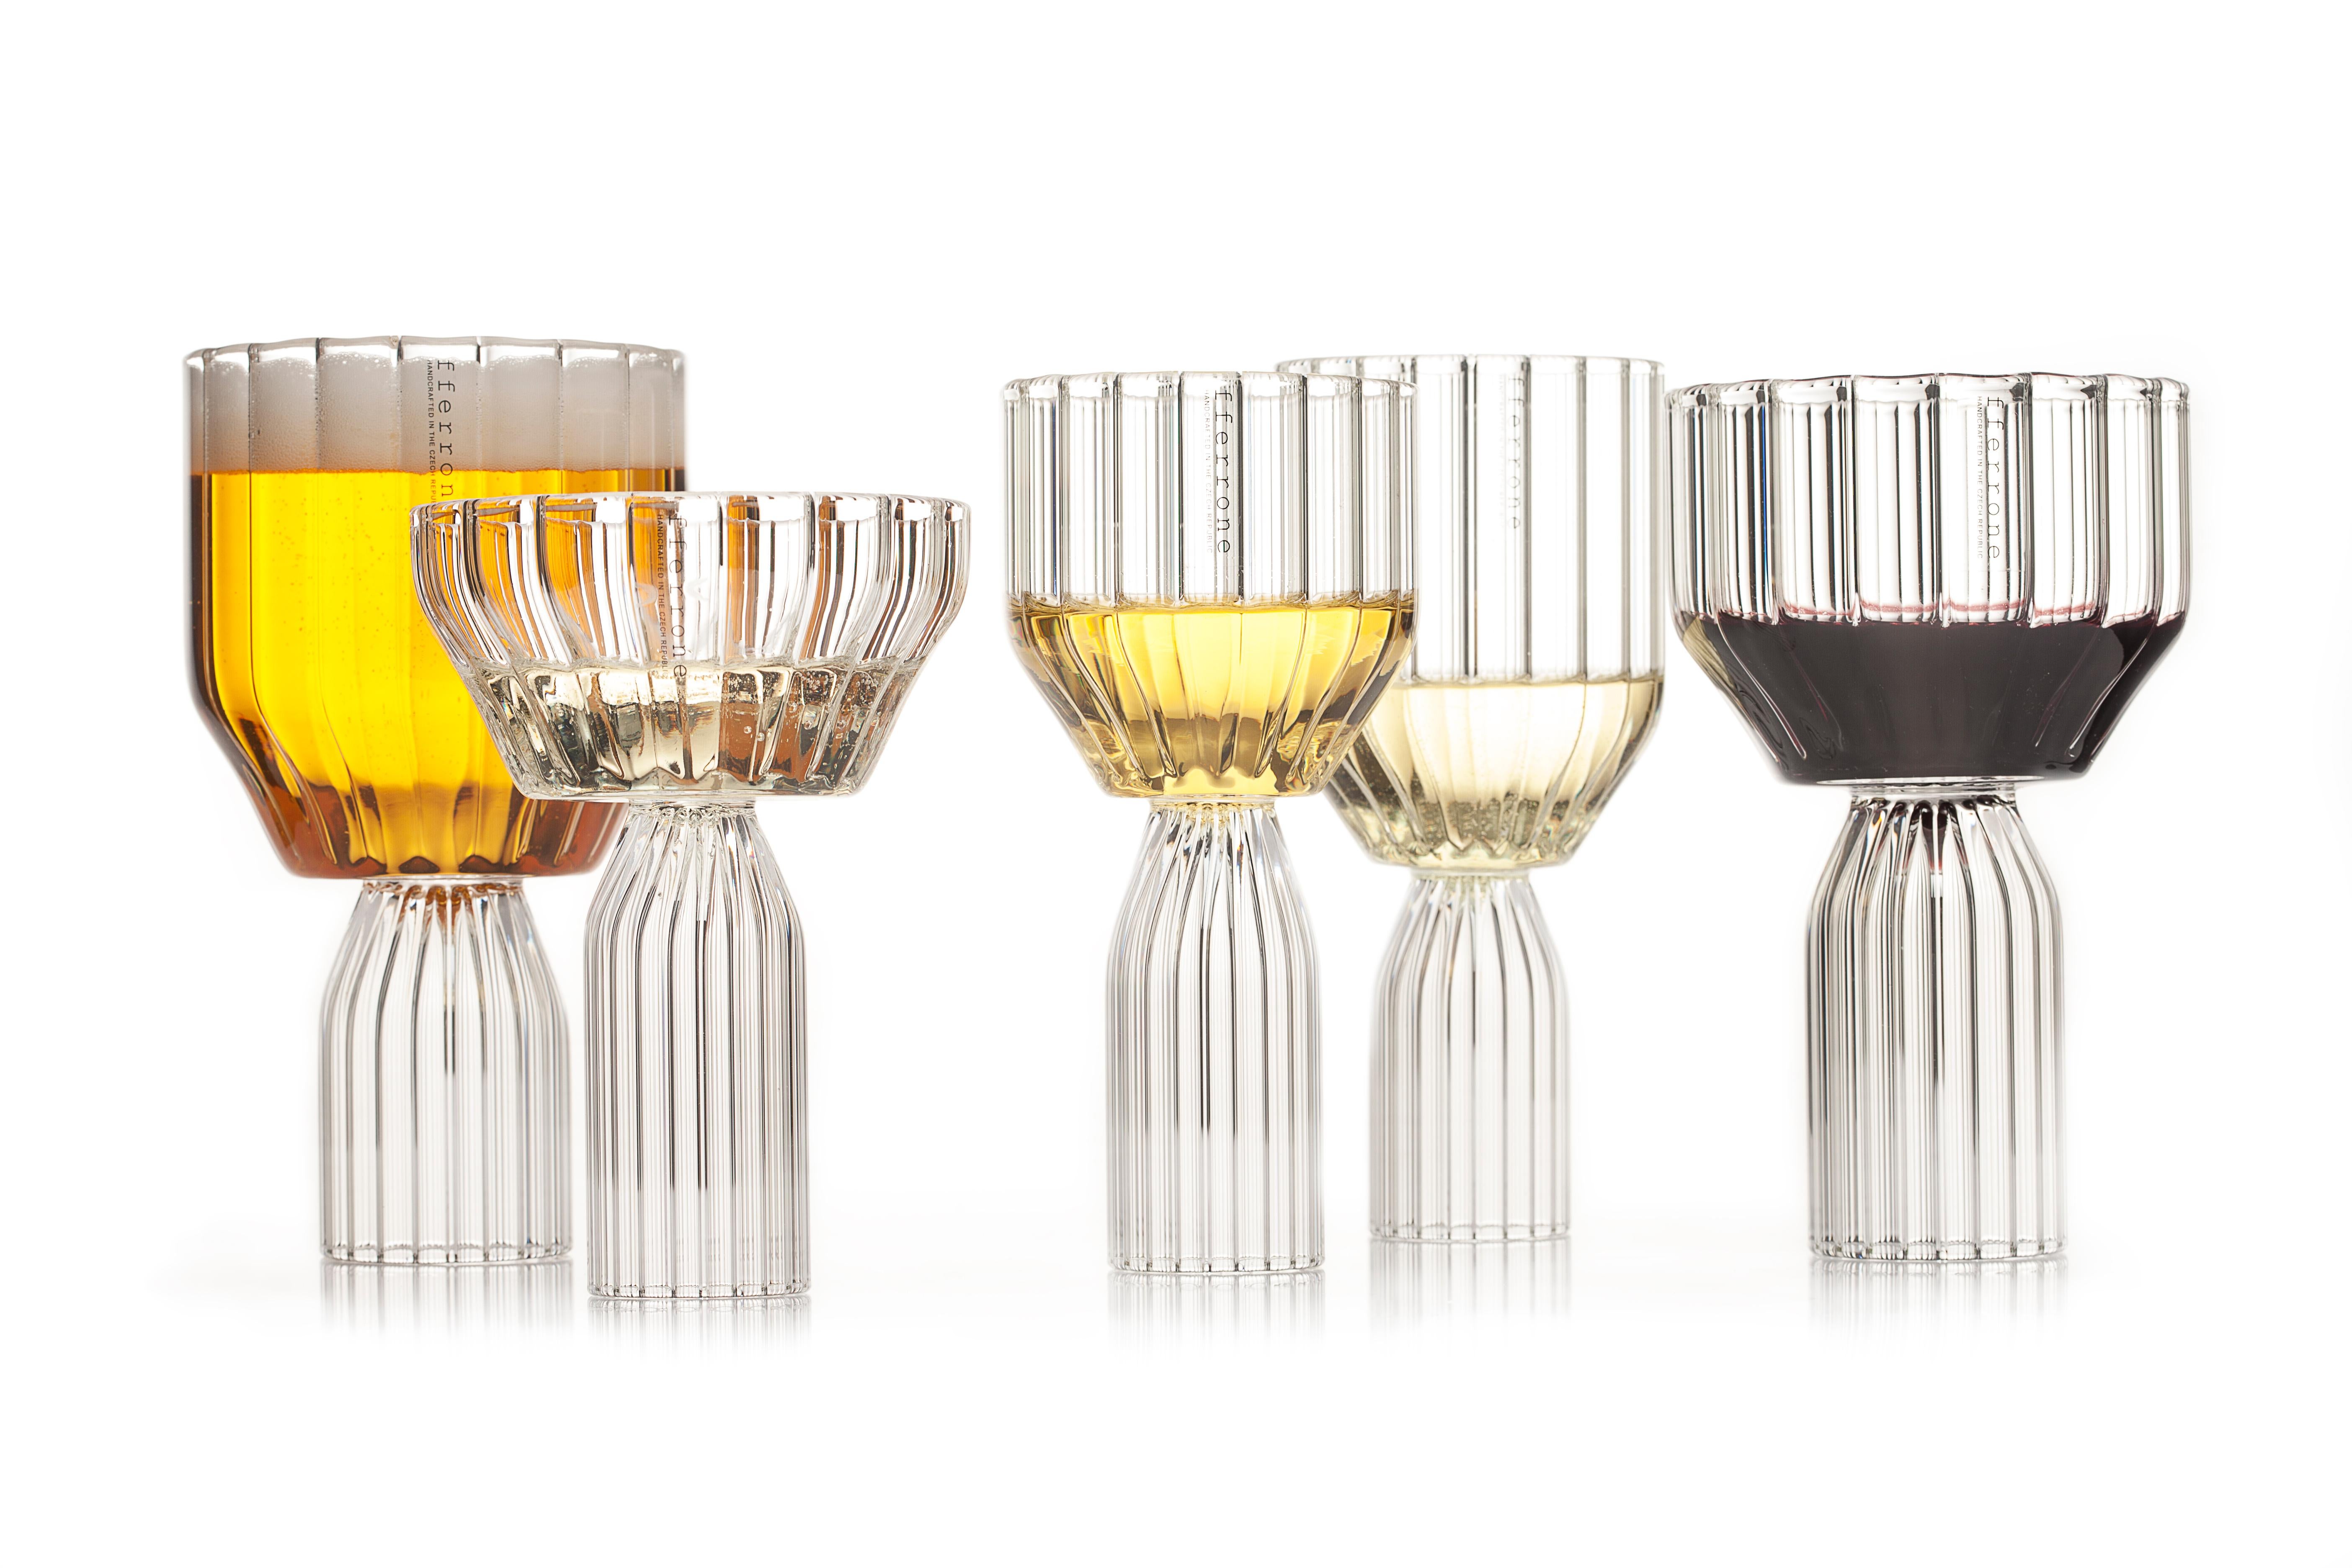 Czech EU Clients Pair of Contemporary Small Goblet Wine Cocktail Glasses in Stock